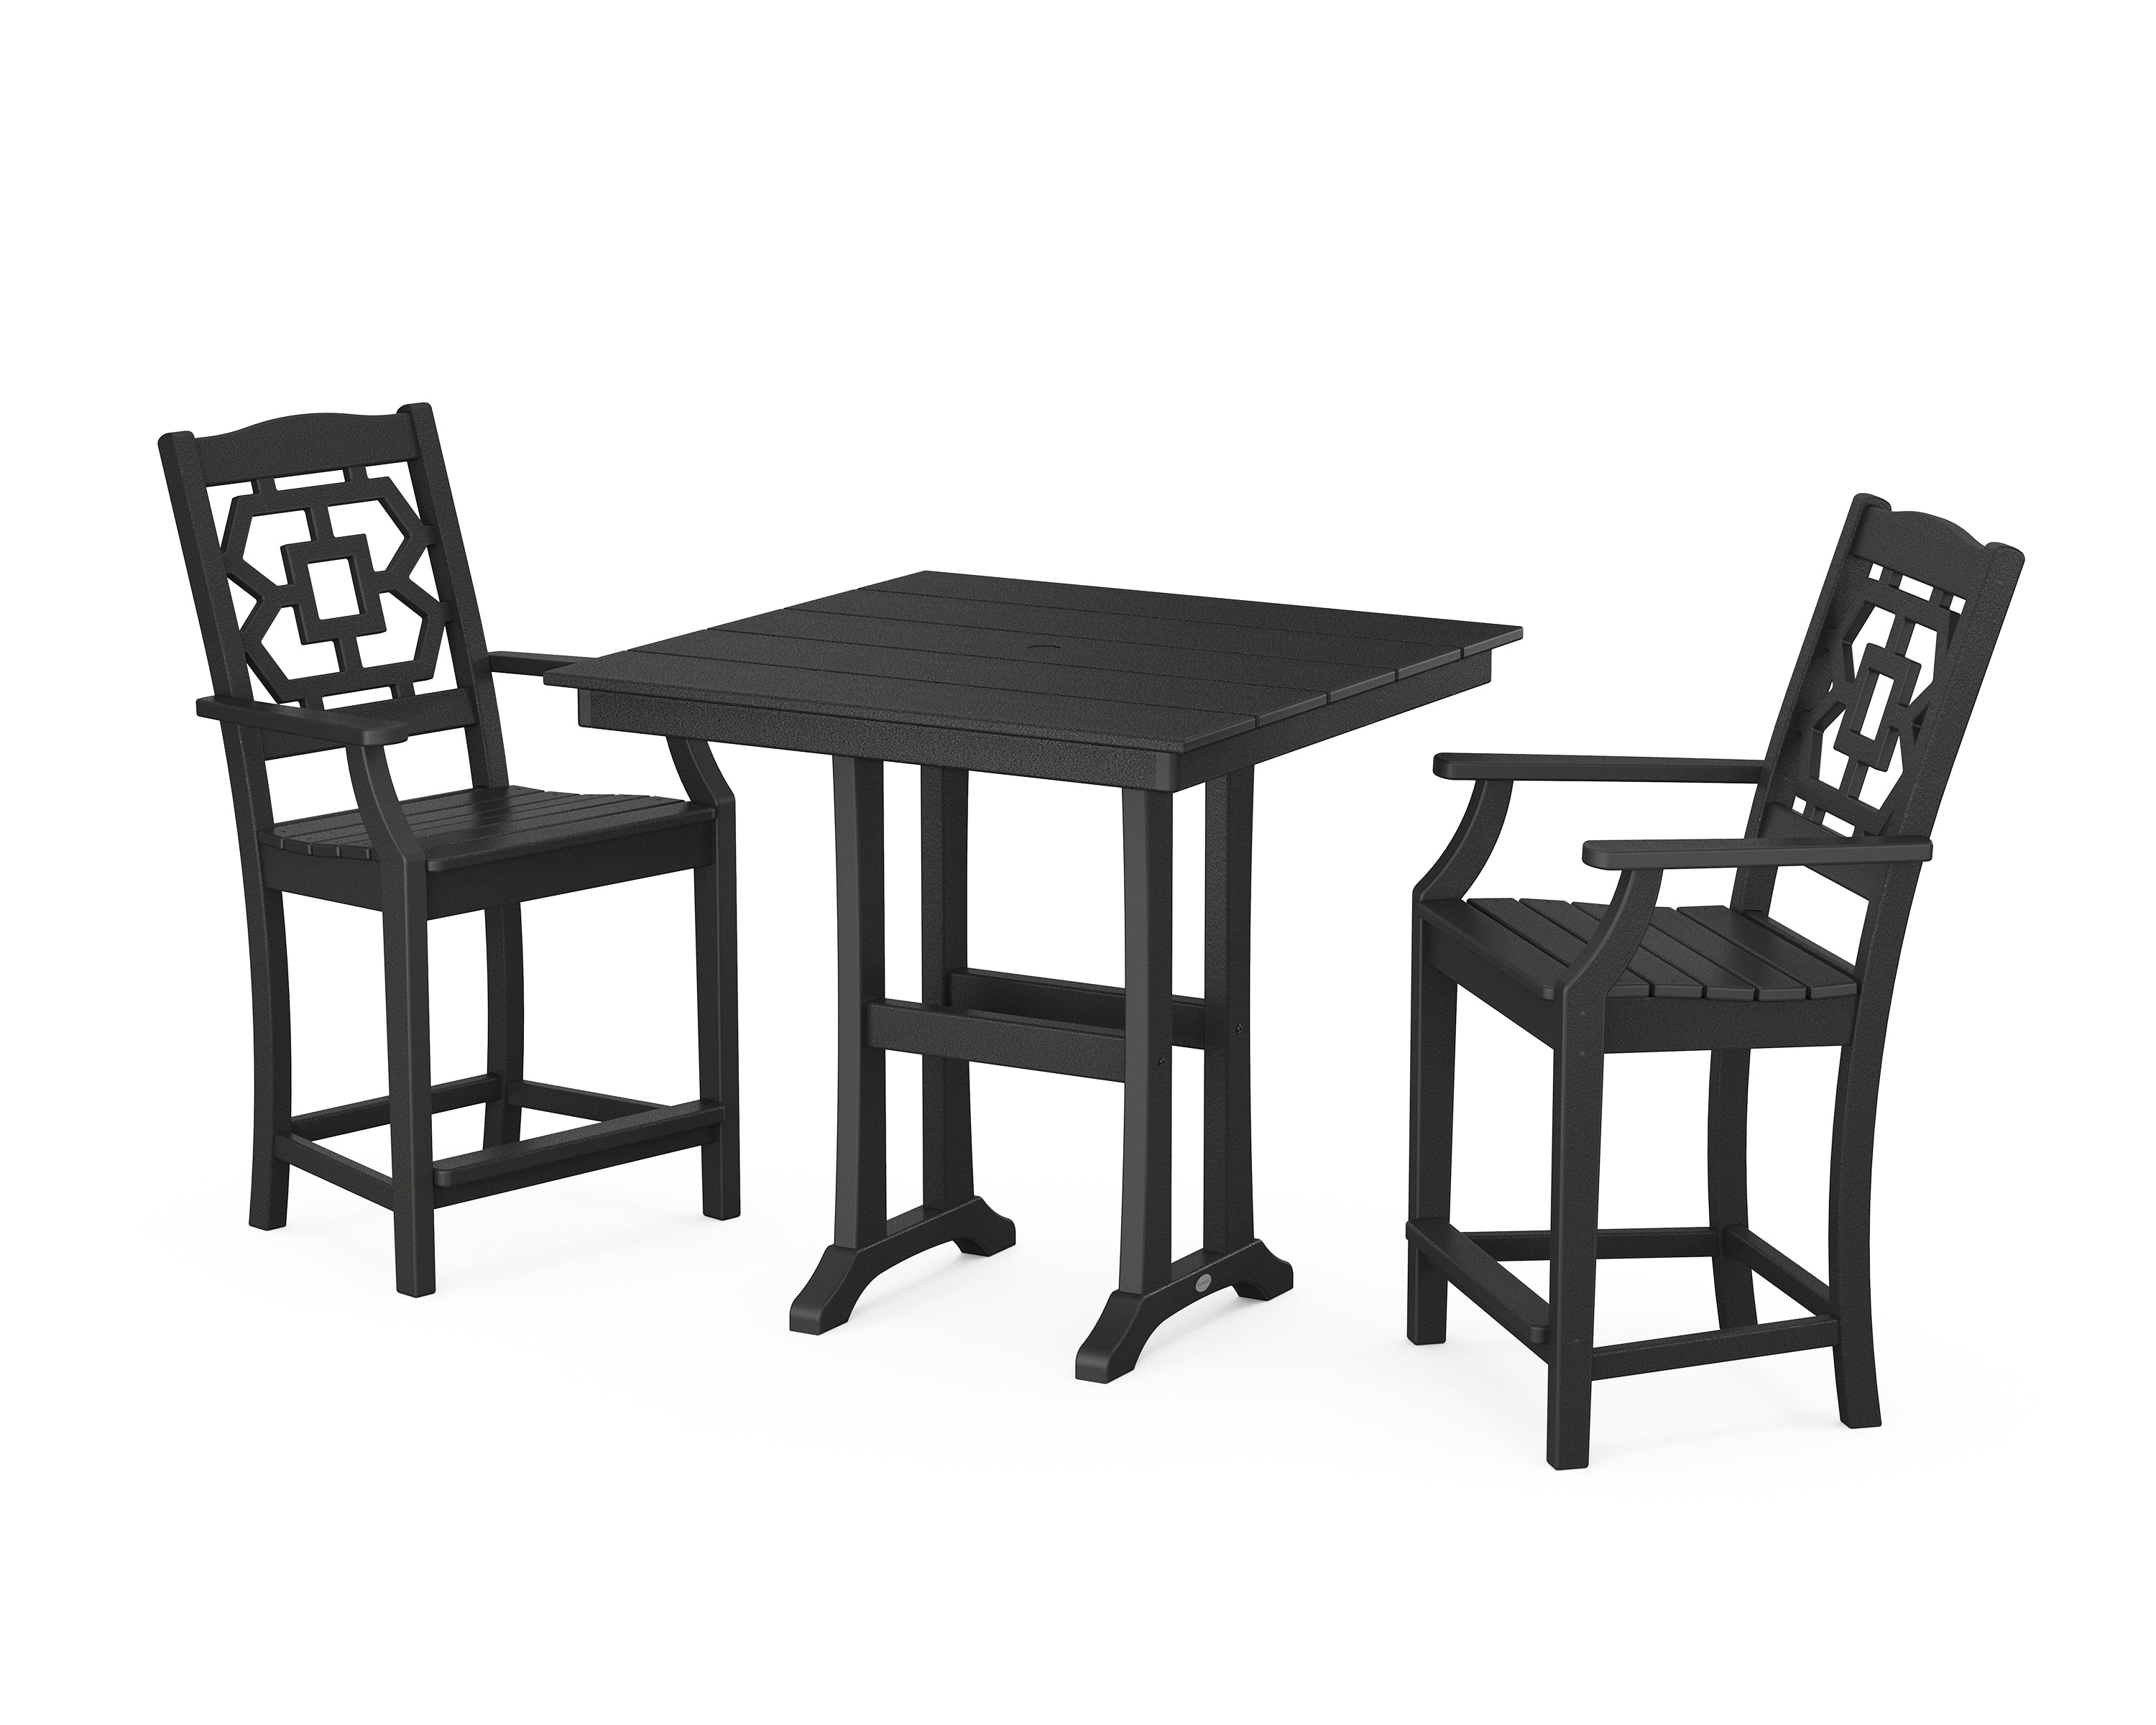 Martha Stewart by POLYWOOD® Chinoiserie 3-Piece Farmhouse Counter Set with Trestle Legs in Black